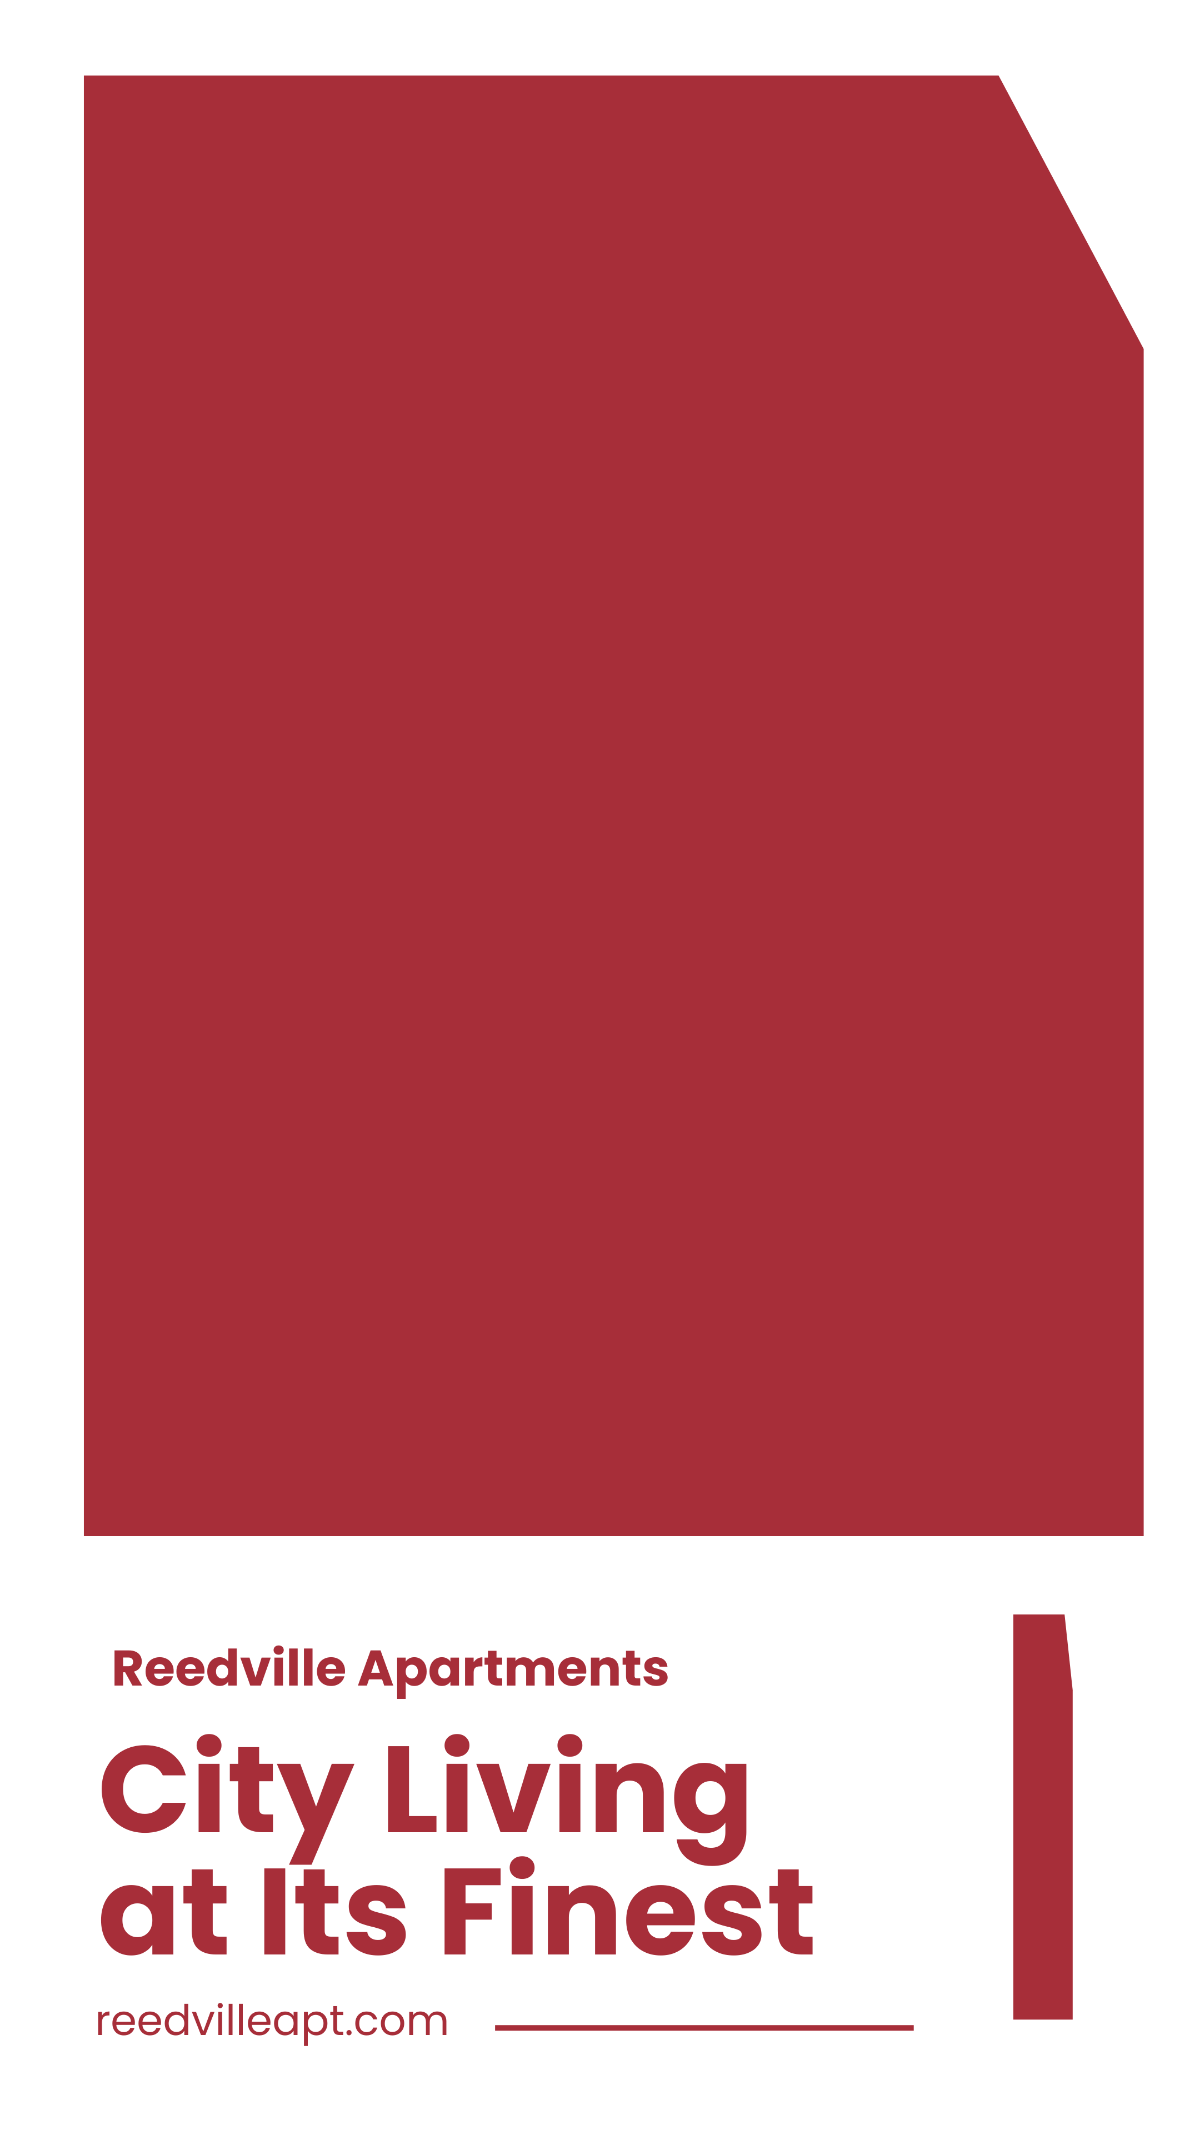 Rental Apartment Snapchat Geofilter Template